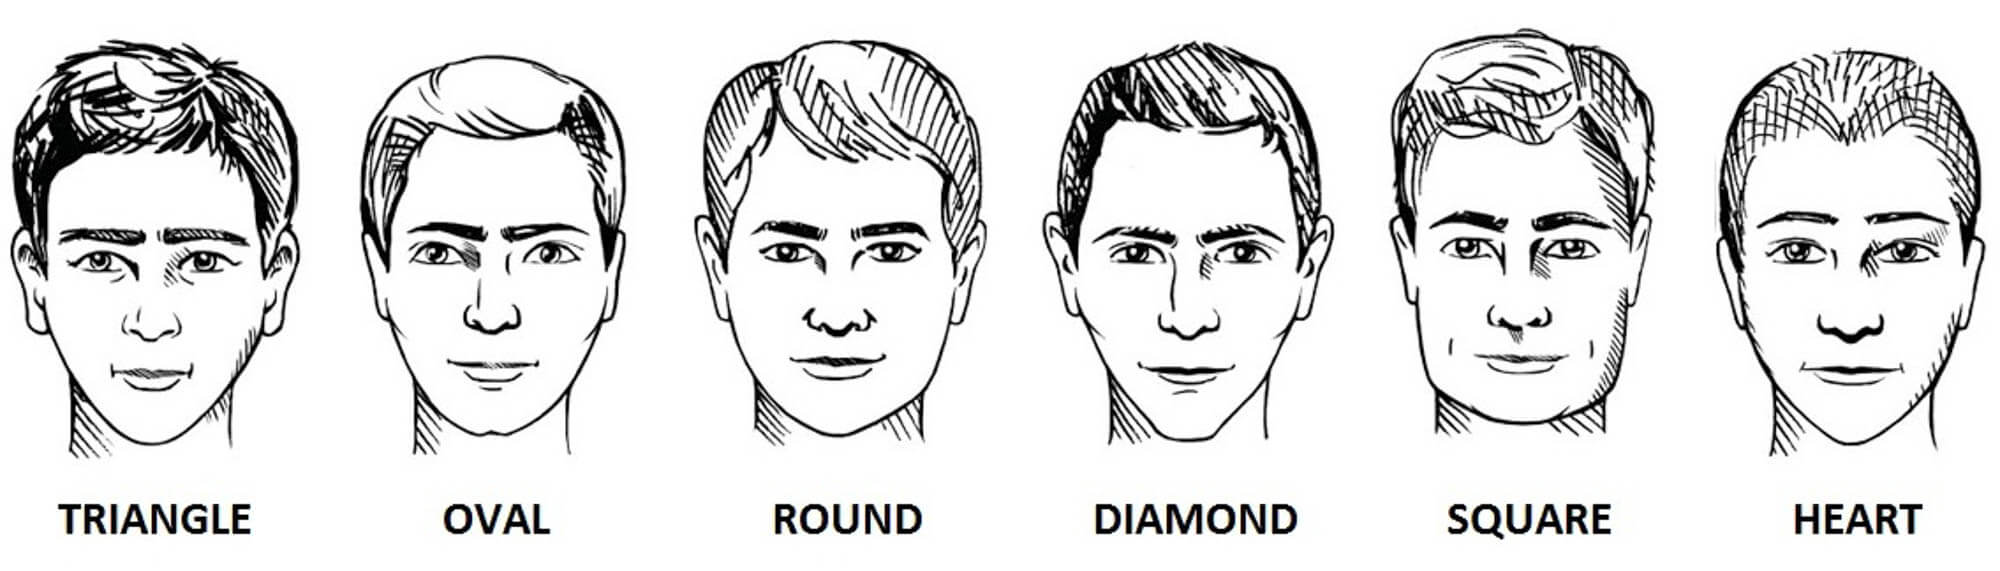 How To Choose The Right Haircut For Your Face Shape | FashionBeans